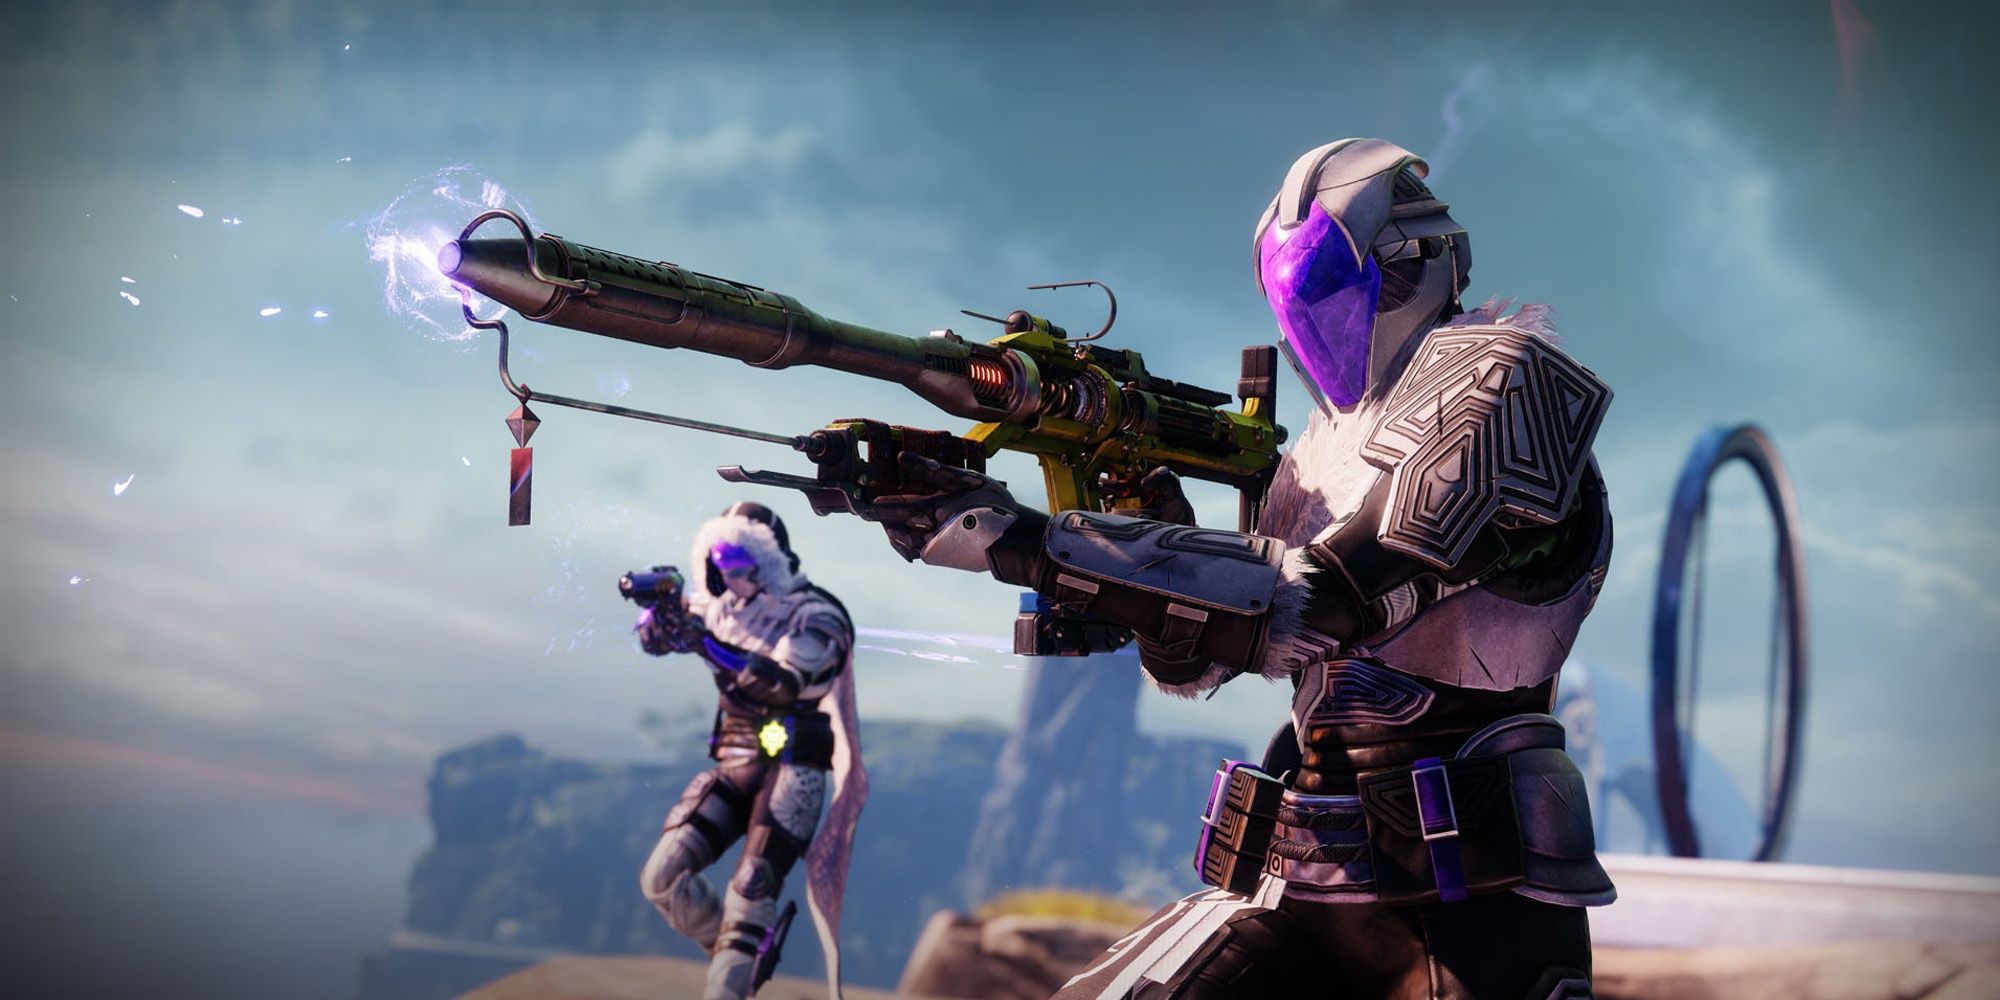 Destiny 2 two Guardians in battle aiming weapons